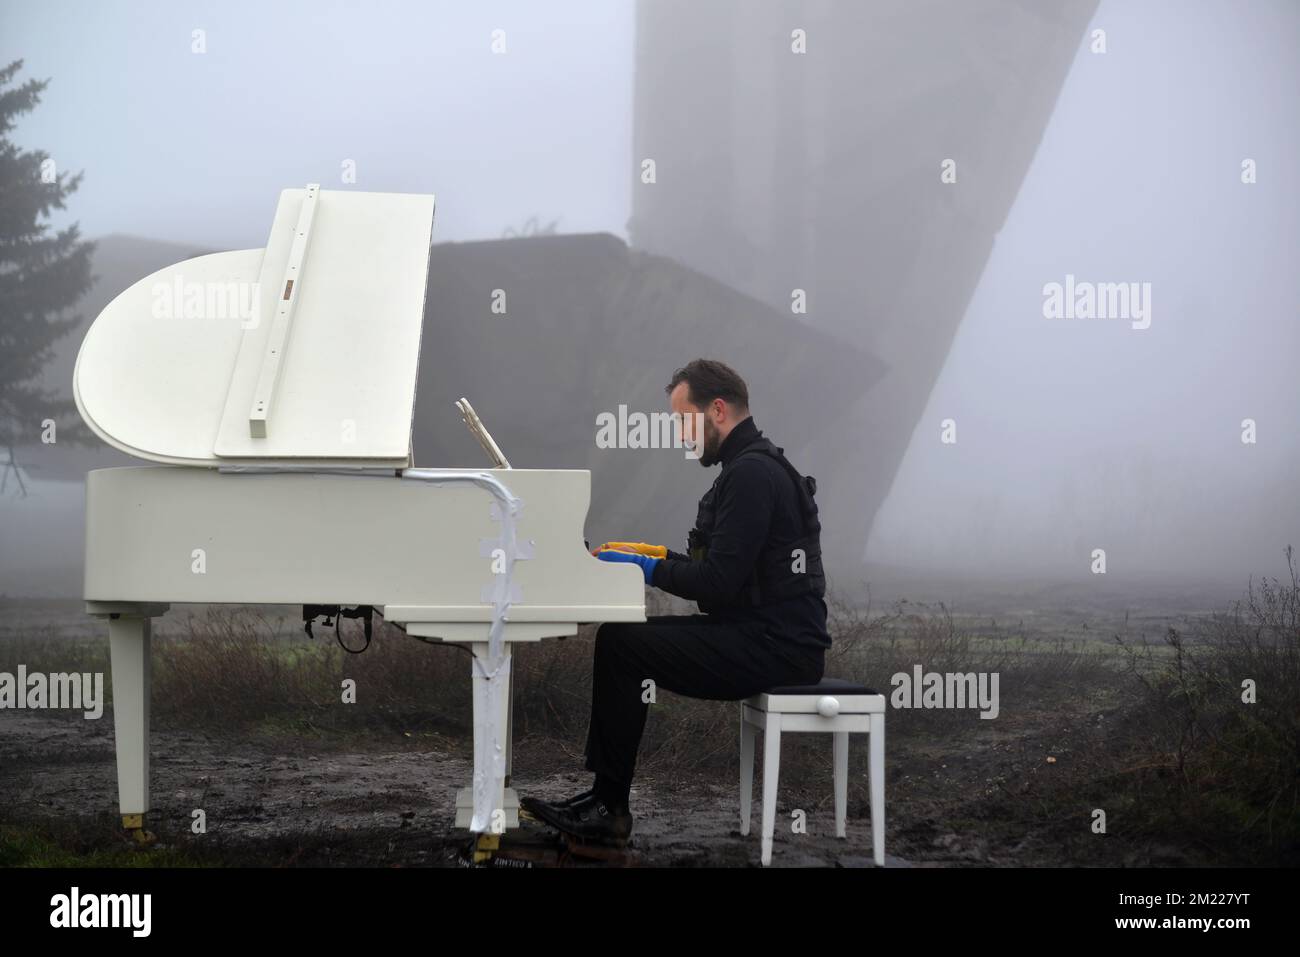 KHARKIV REGION, UKRAINE - DECEMBER 13, 2022 - A prominent pianist, vice president and artistic director of the Canadian foundation 'Looking at the Stars' in the European Union Darius Mazintas performs in the city of Izium, Kharkiv Region. He played compositions from the cycle 'Naive Music' by a Ukrainian composer Valentyn Sylvestrov, Kharkiv Region, northeastern Ukraine. Stock Photo